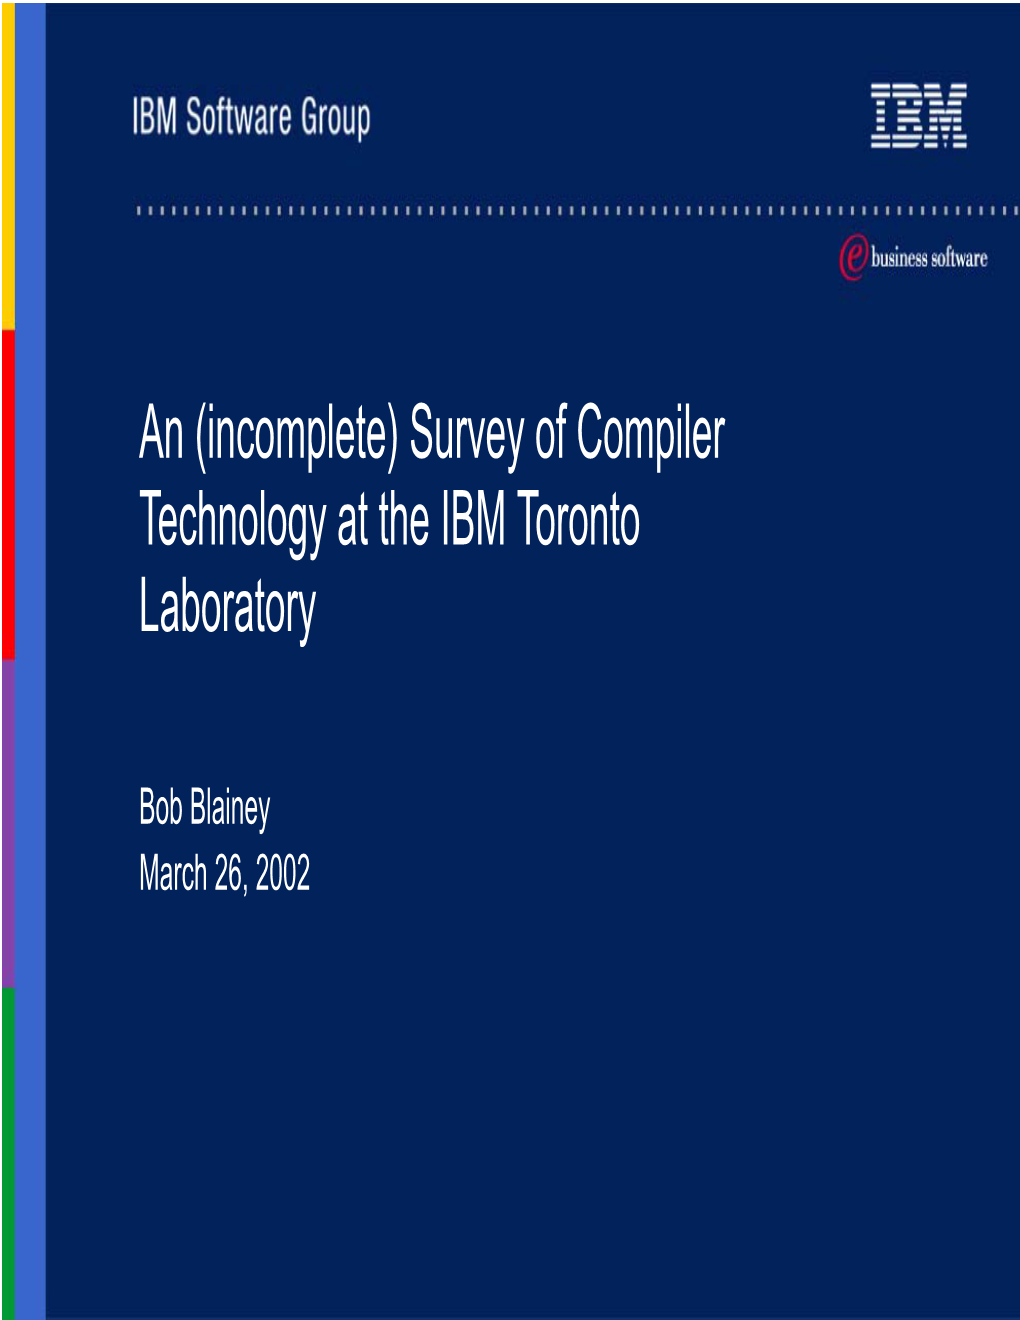 Survey of Compiler Technology at the IBM Toronto Laboratory